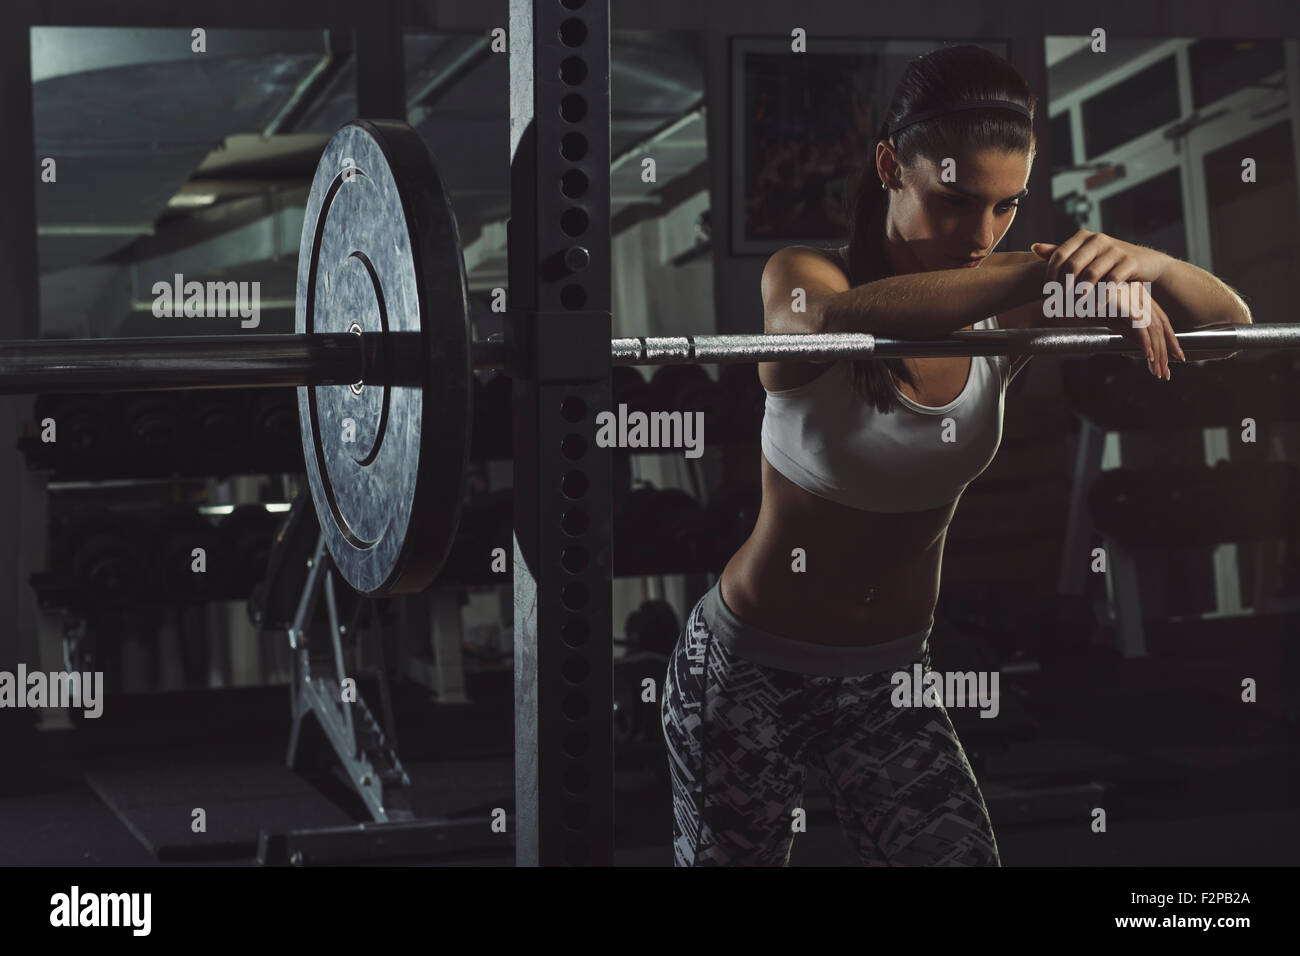 Muscular athlete leaning on barbell in gym Stock Photo